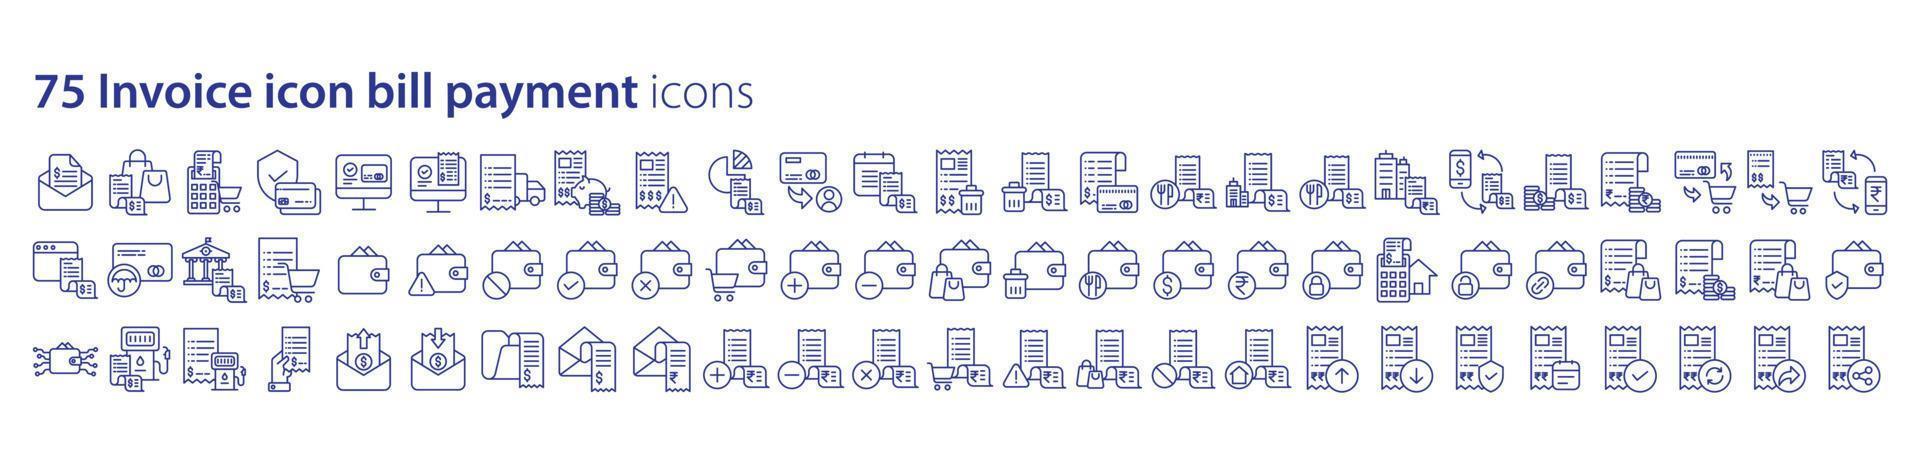 Collection of icons related to Bill payments and Invoice, including icons like Purchase, dollar, Debit card, Receipt and more. vector illustrations, Pixel Perfect